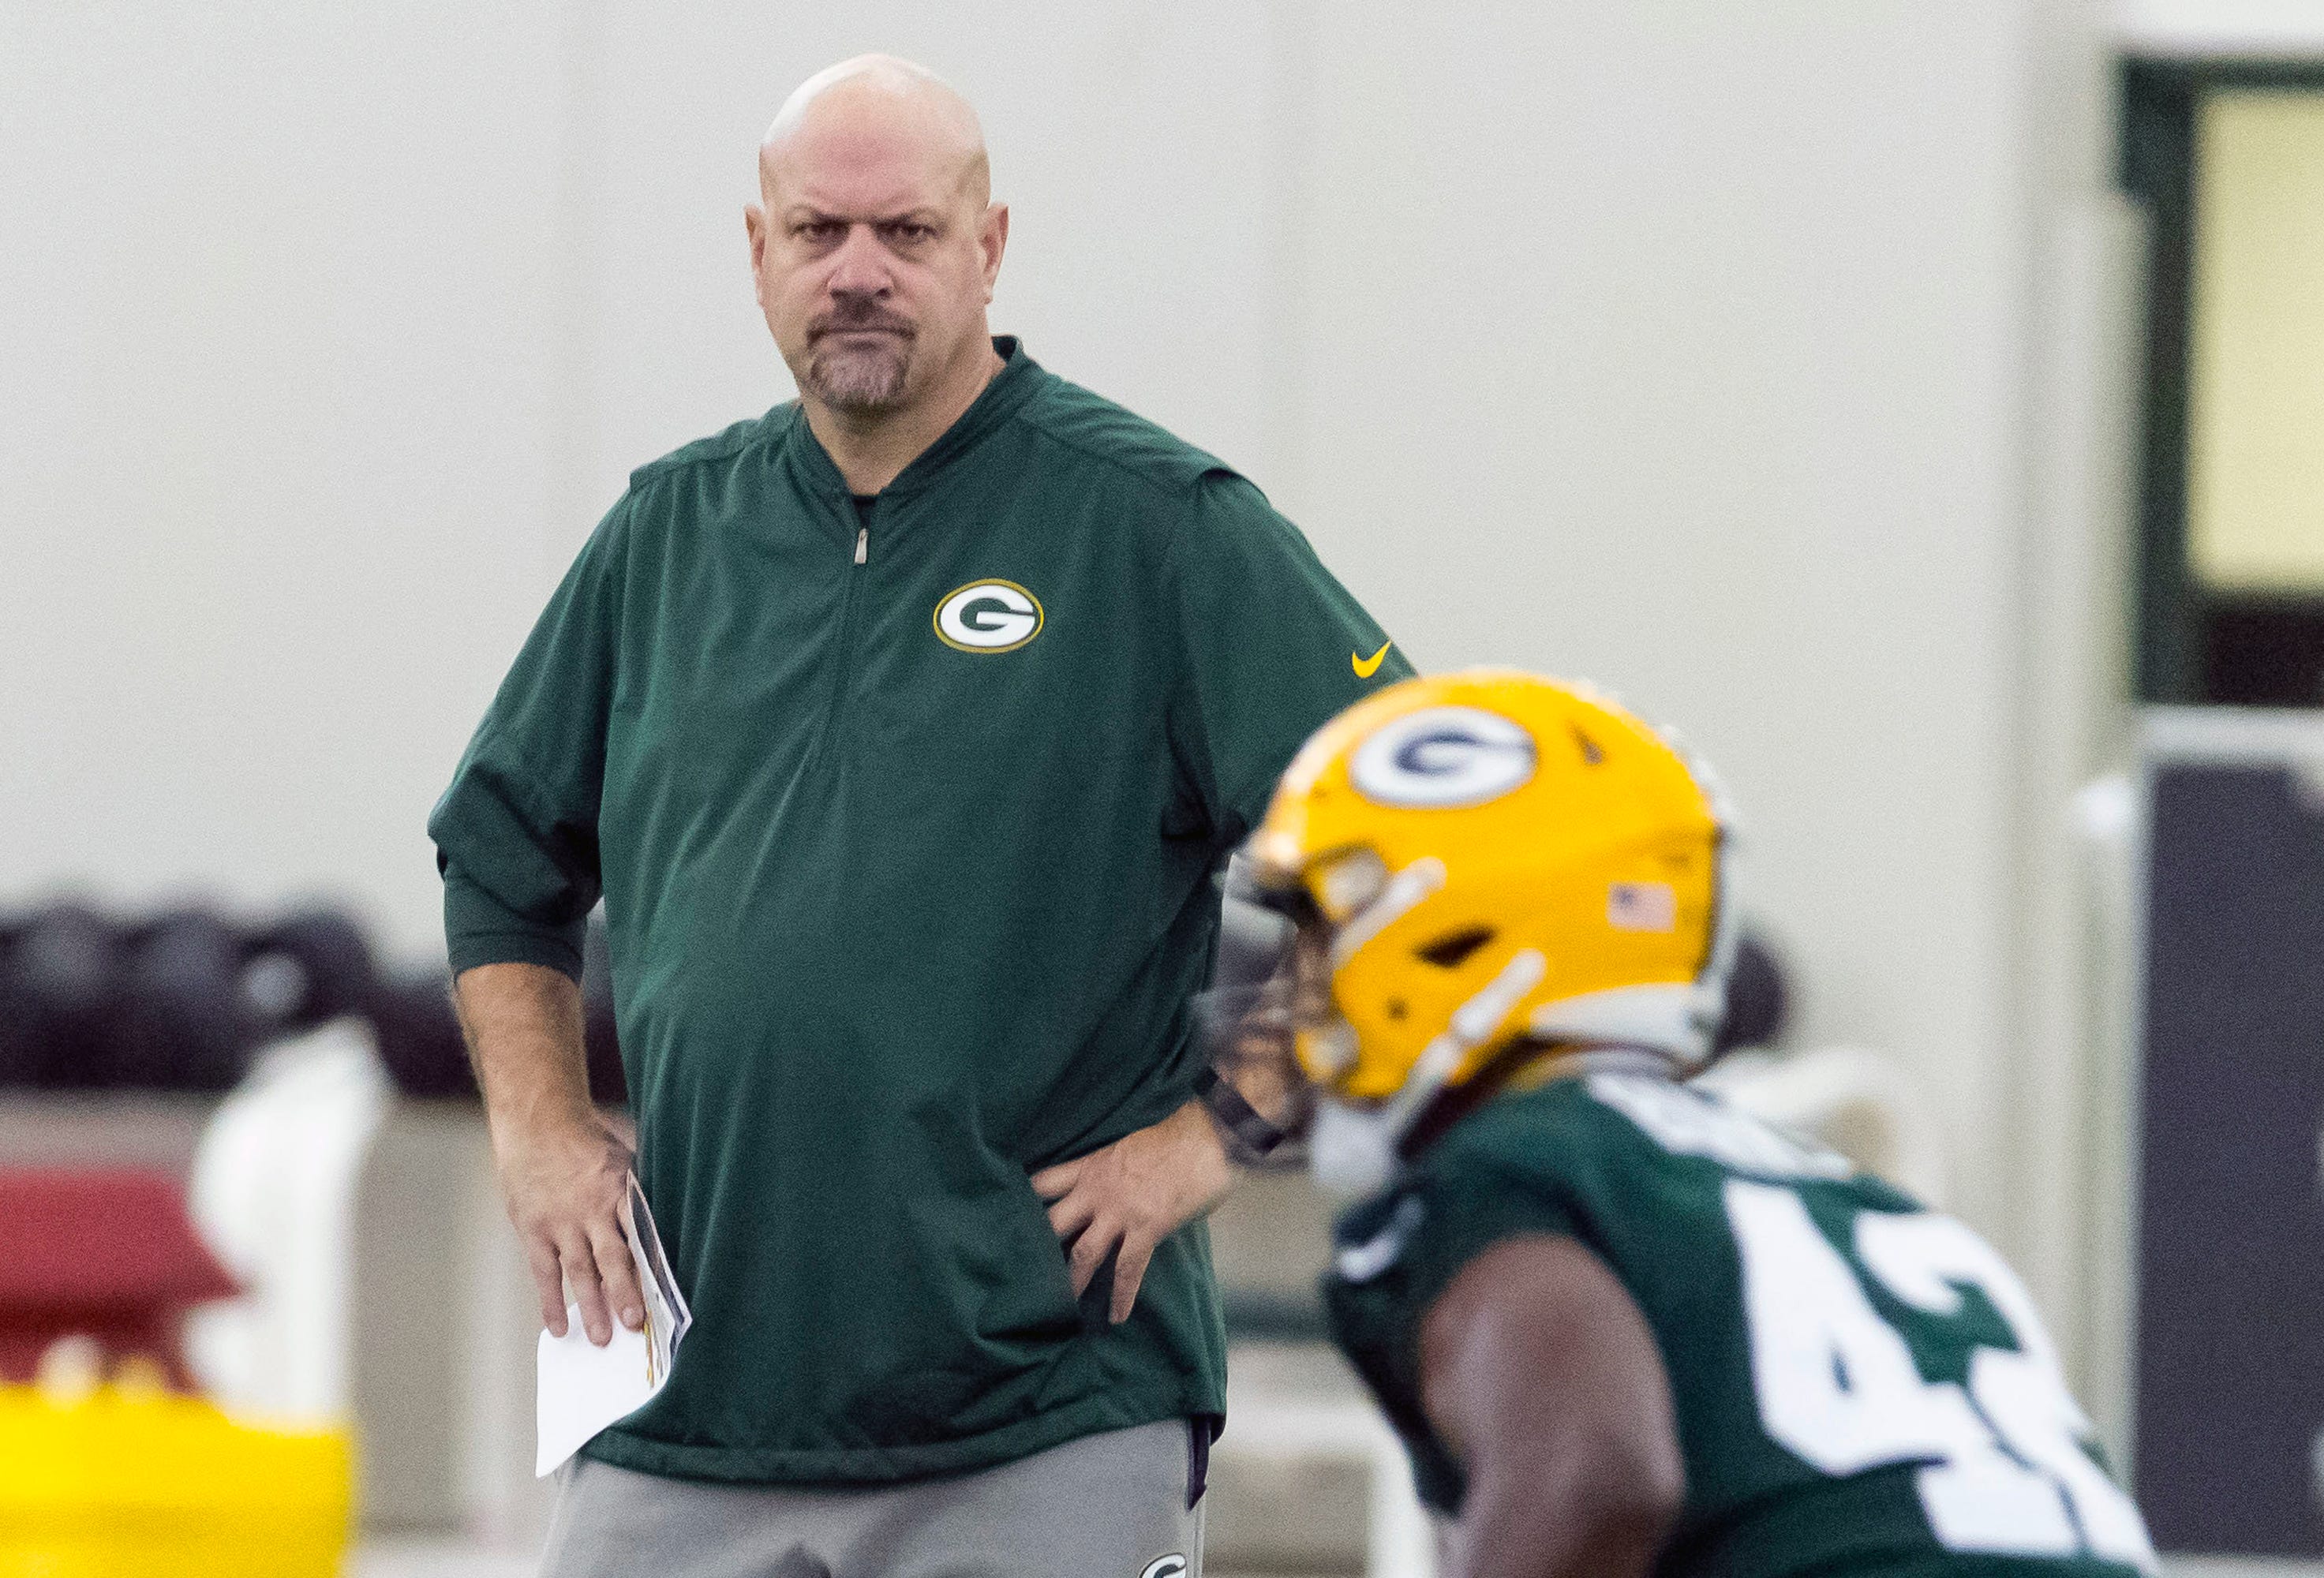 Coaching roots run deep for new Packers DC Mike Petttine